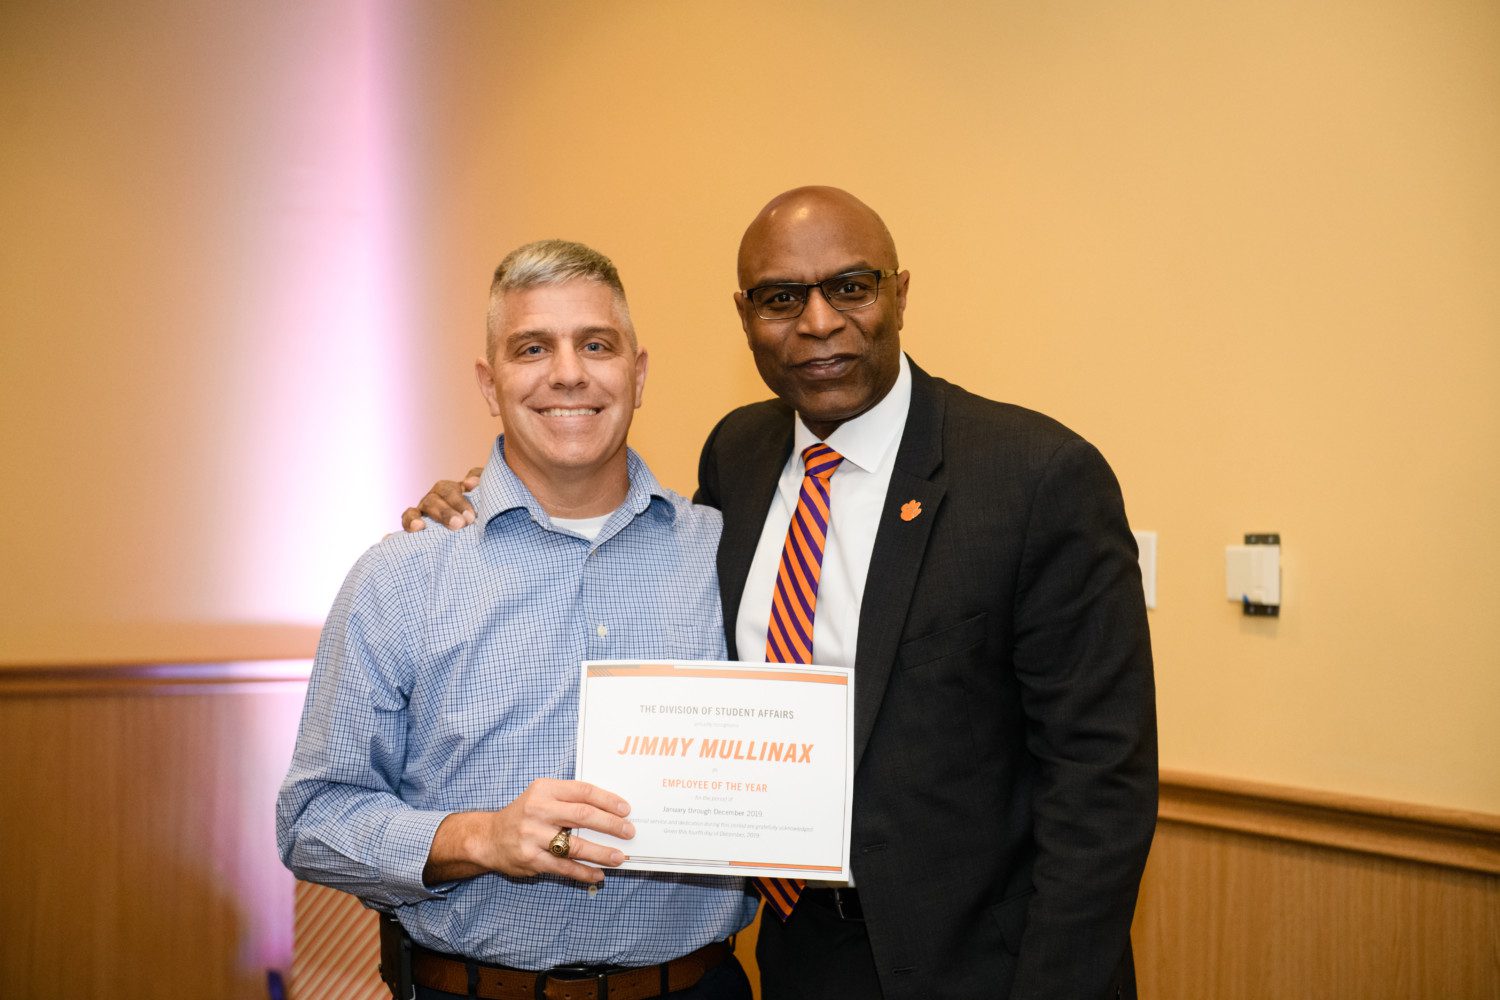 Jimmy Mullinax, 2019 Student Affairs Employee of the Year, pictured with Interim Vice President for Student Affairs Chris Miller